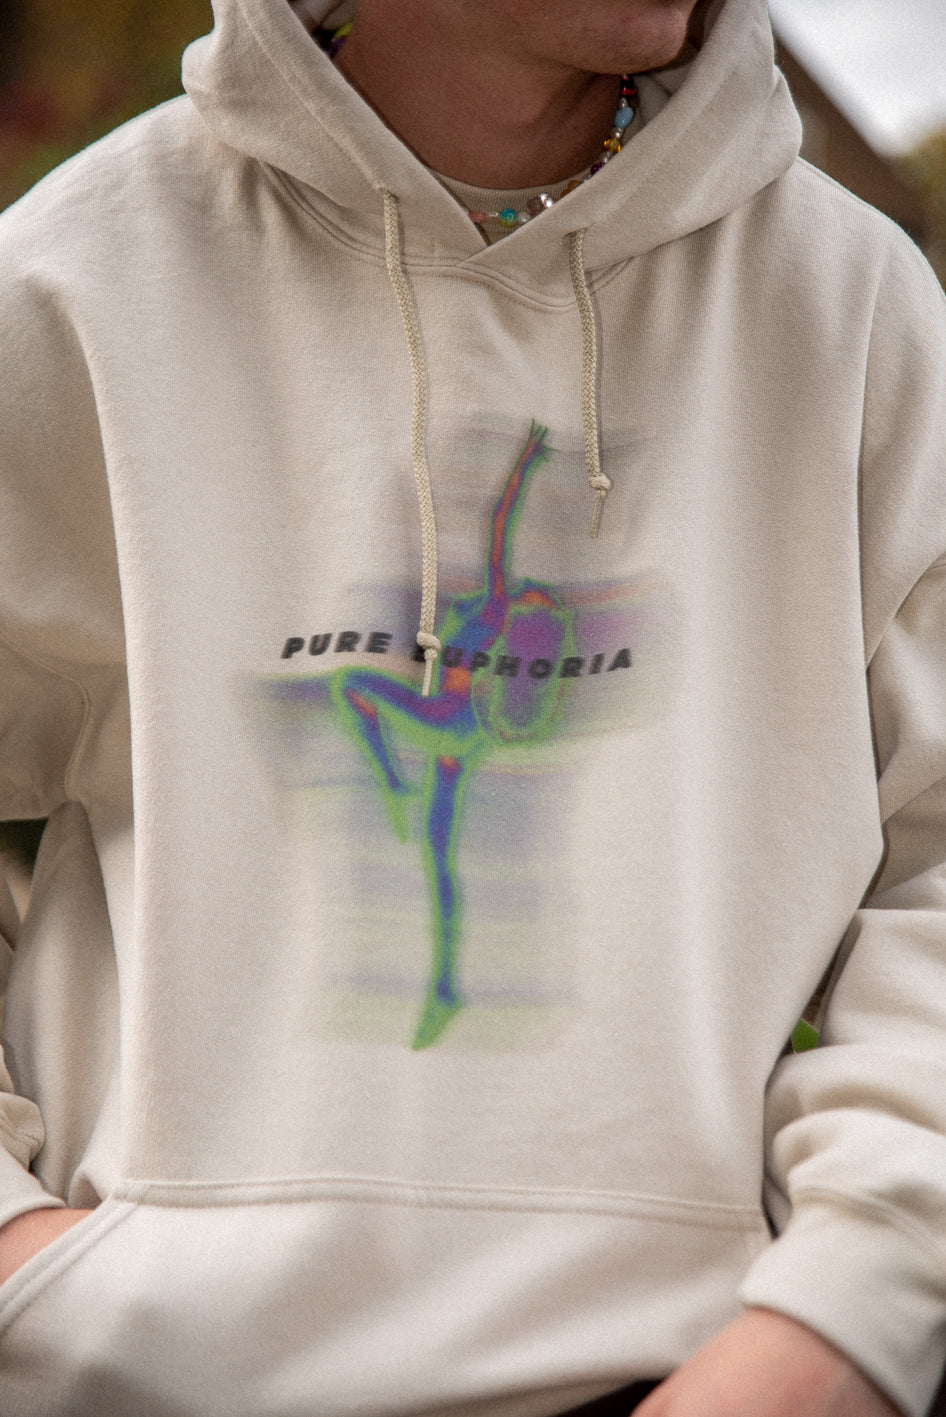 Hoodie in Sand With Pure Euphoria Print